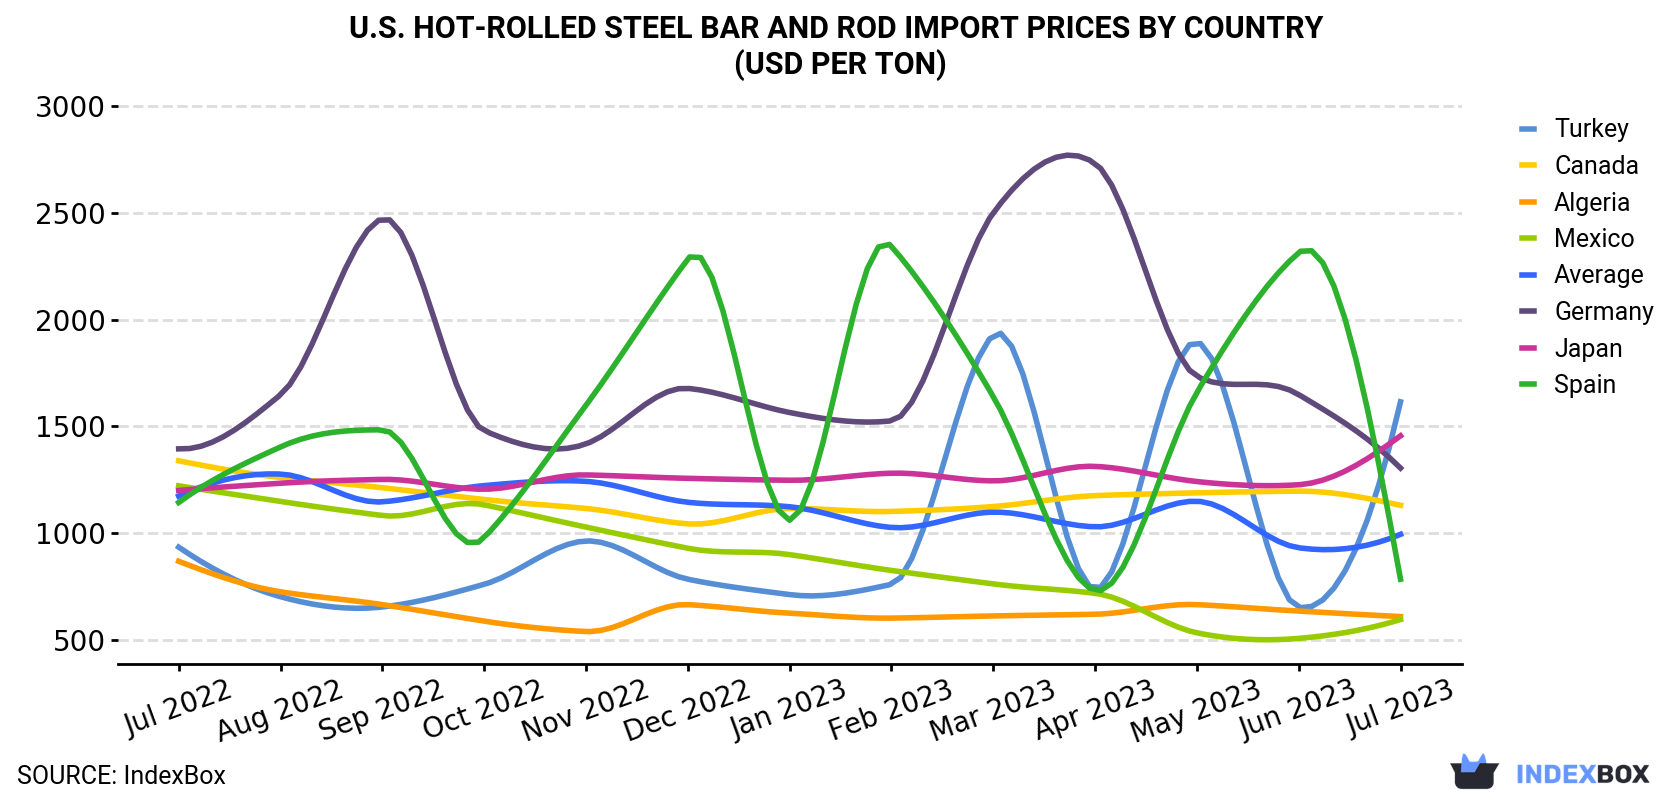 U.S. Hot-Rolled Steel Bar and Rod Import Prices By Country (USD Per Ton)